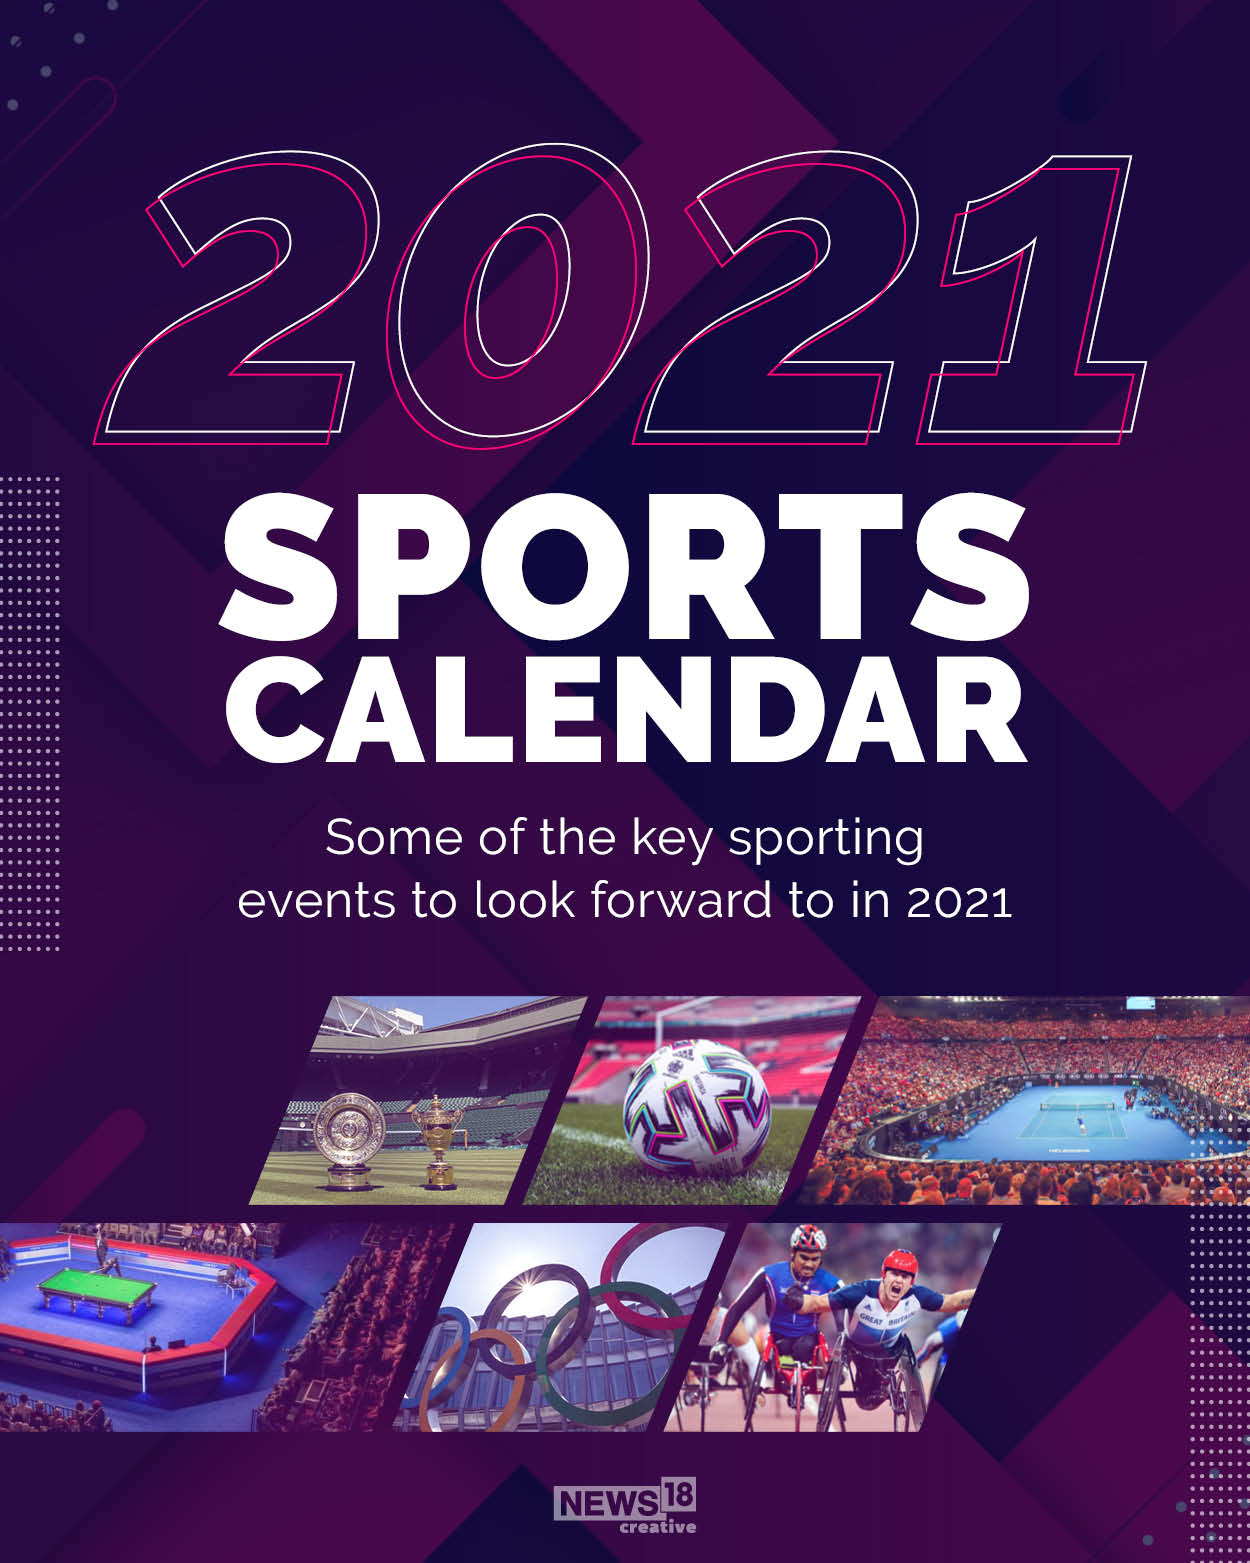 From Wimbledon to Olympics: Major sporting events to look forward to in 2021